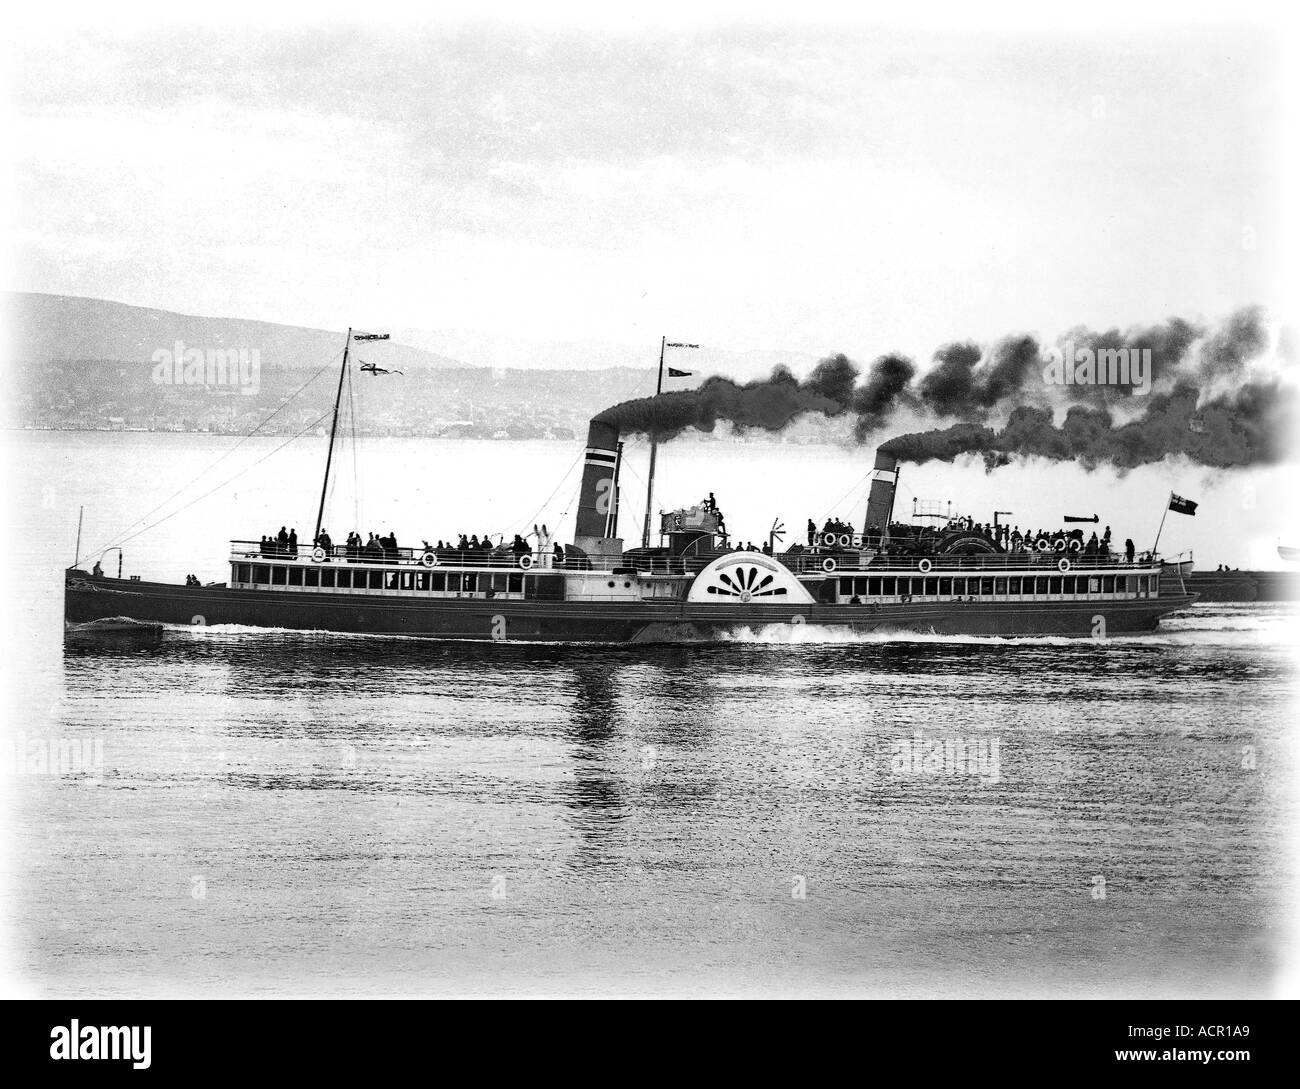 UK Scotland Firth of Clyde Greenock Paddle Steamer PS Chancellor during 1890 s built River Clyde 1880 Stock Photo